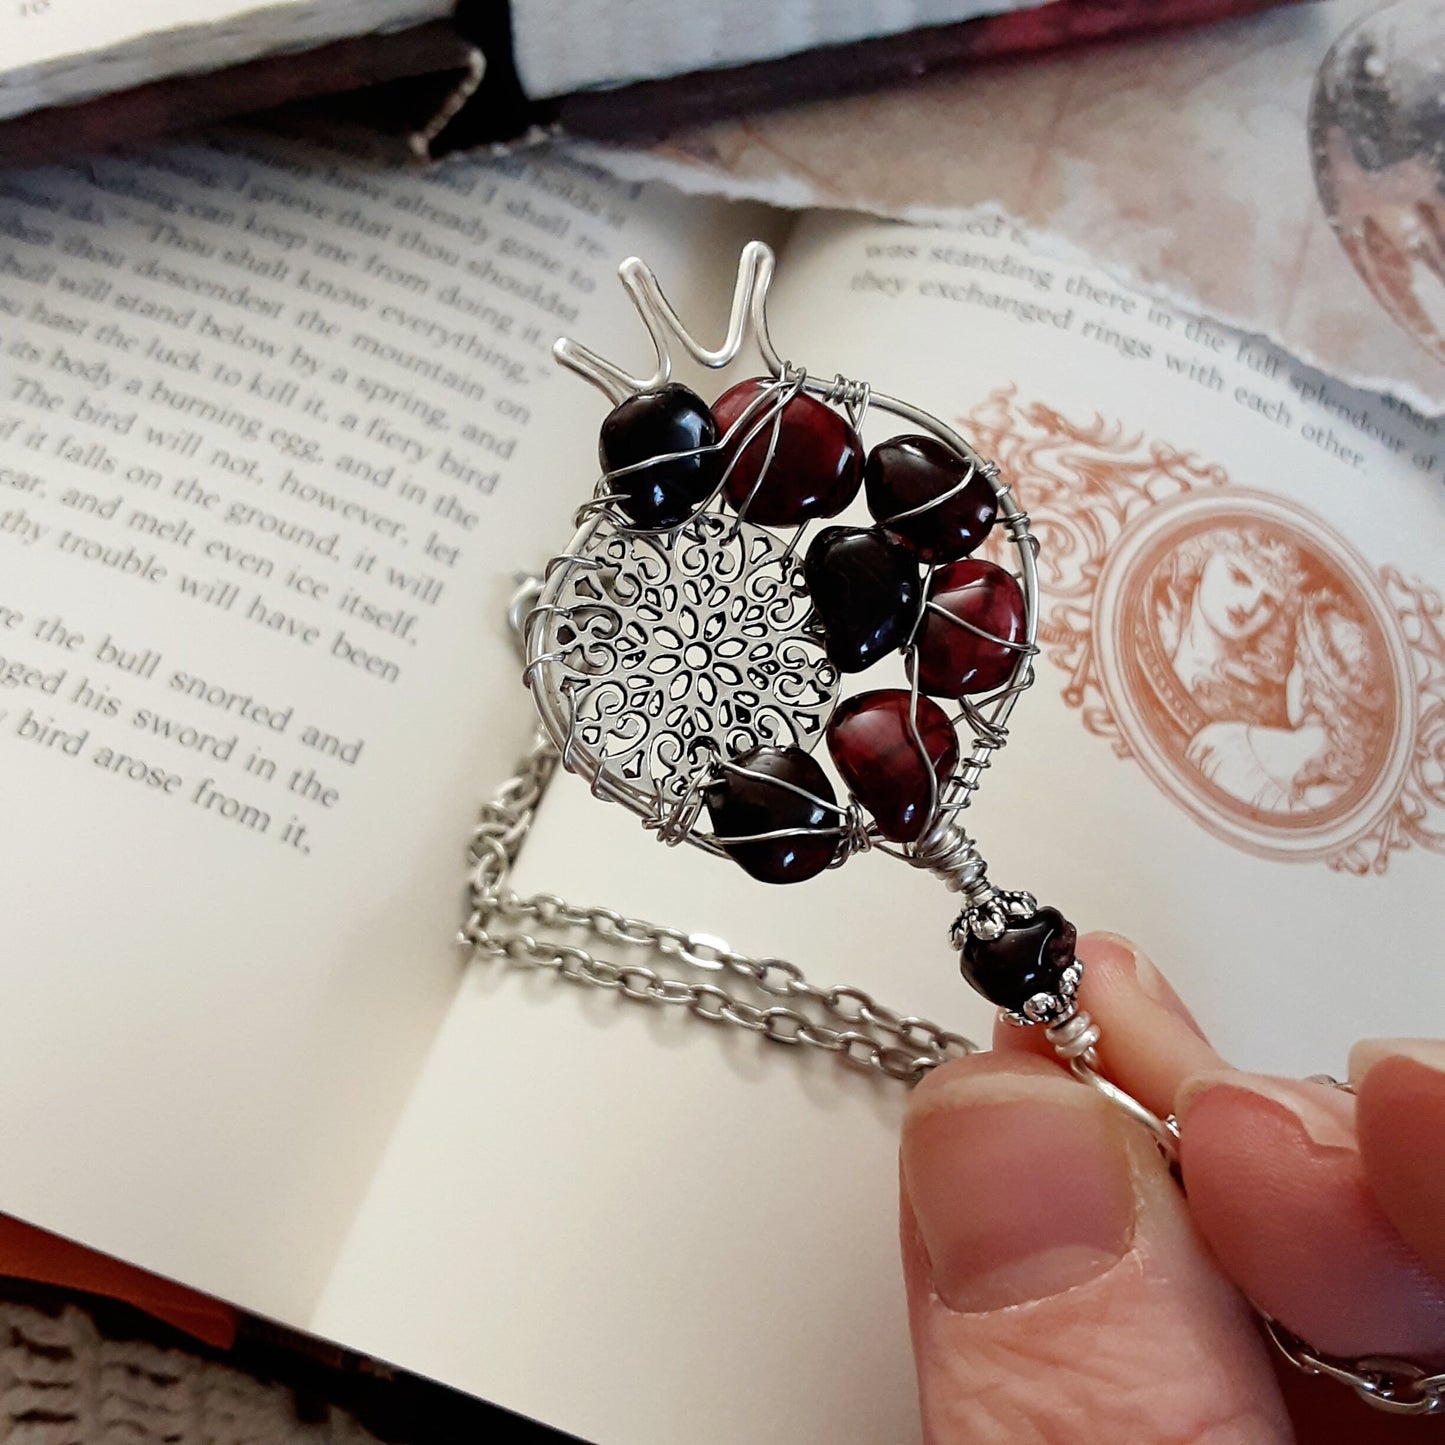 Persephone's Pomegranate Necklace with Garnet, Pagan Goddess Dedication Jewelry, Forbidden Fruit, Gemstone of Passion, Self Love, Courage